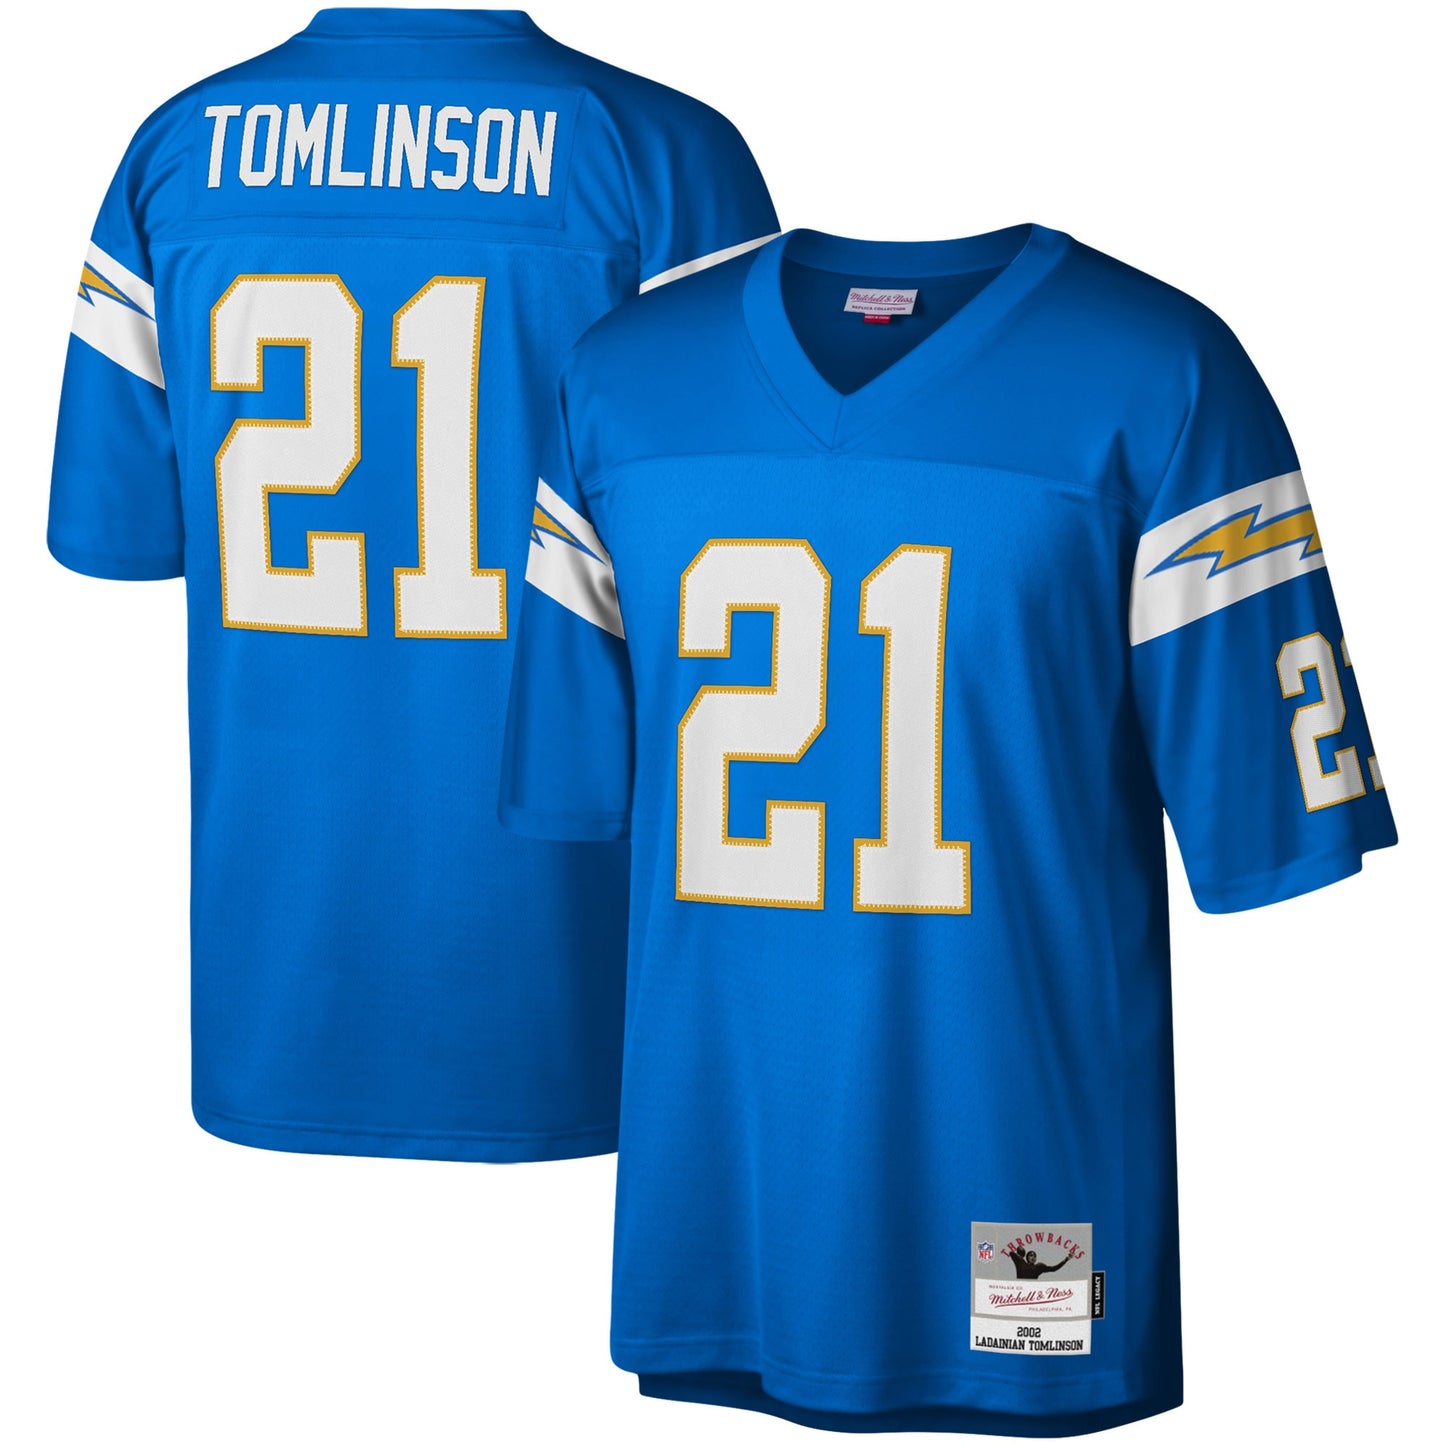 LaDainian Tomlinson Los Angeles Chargers Mitchell & Ness Legacy Replica Jersey - Powder Blue